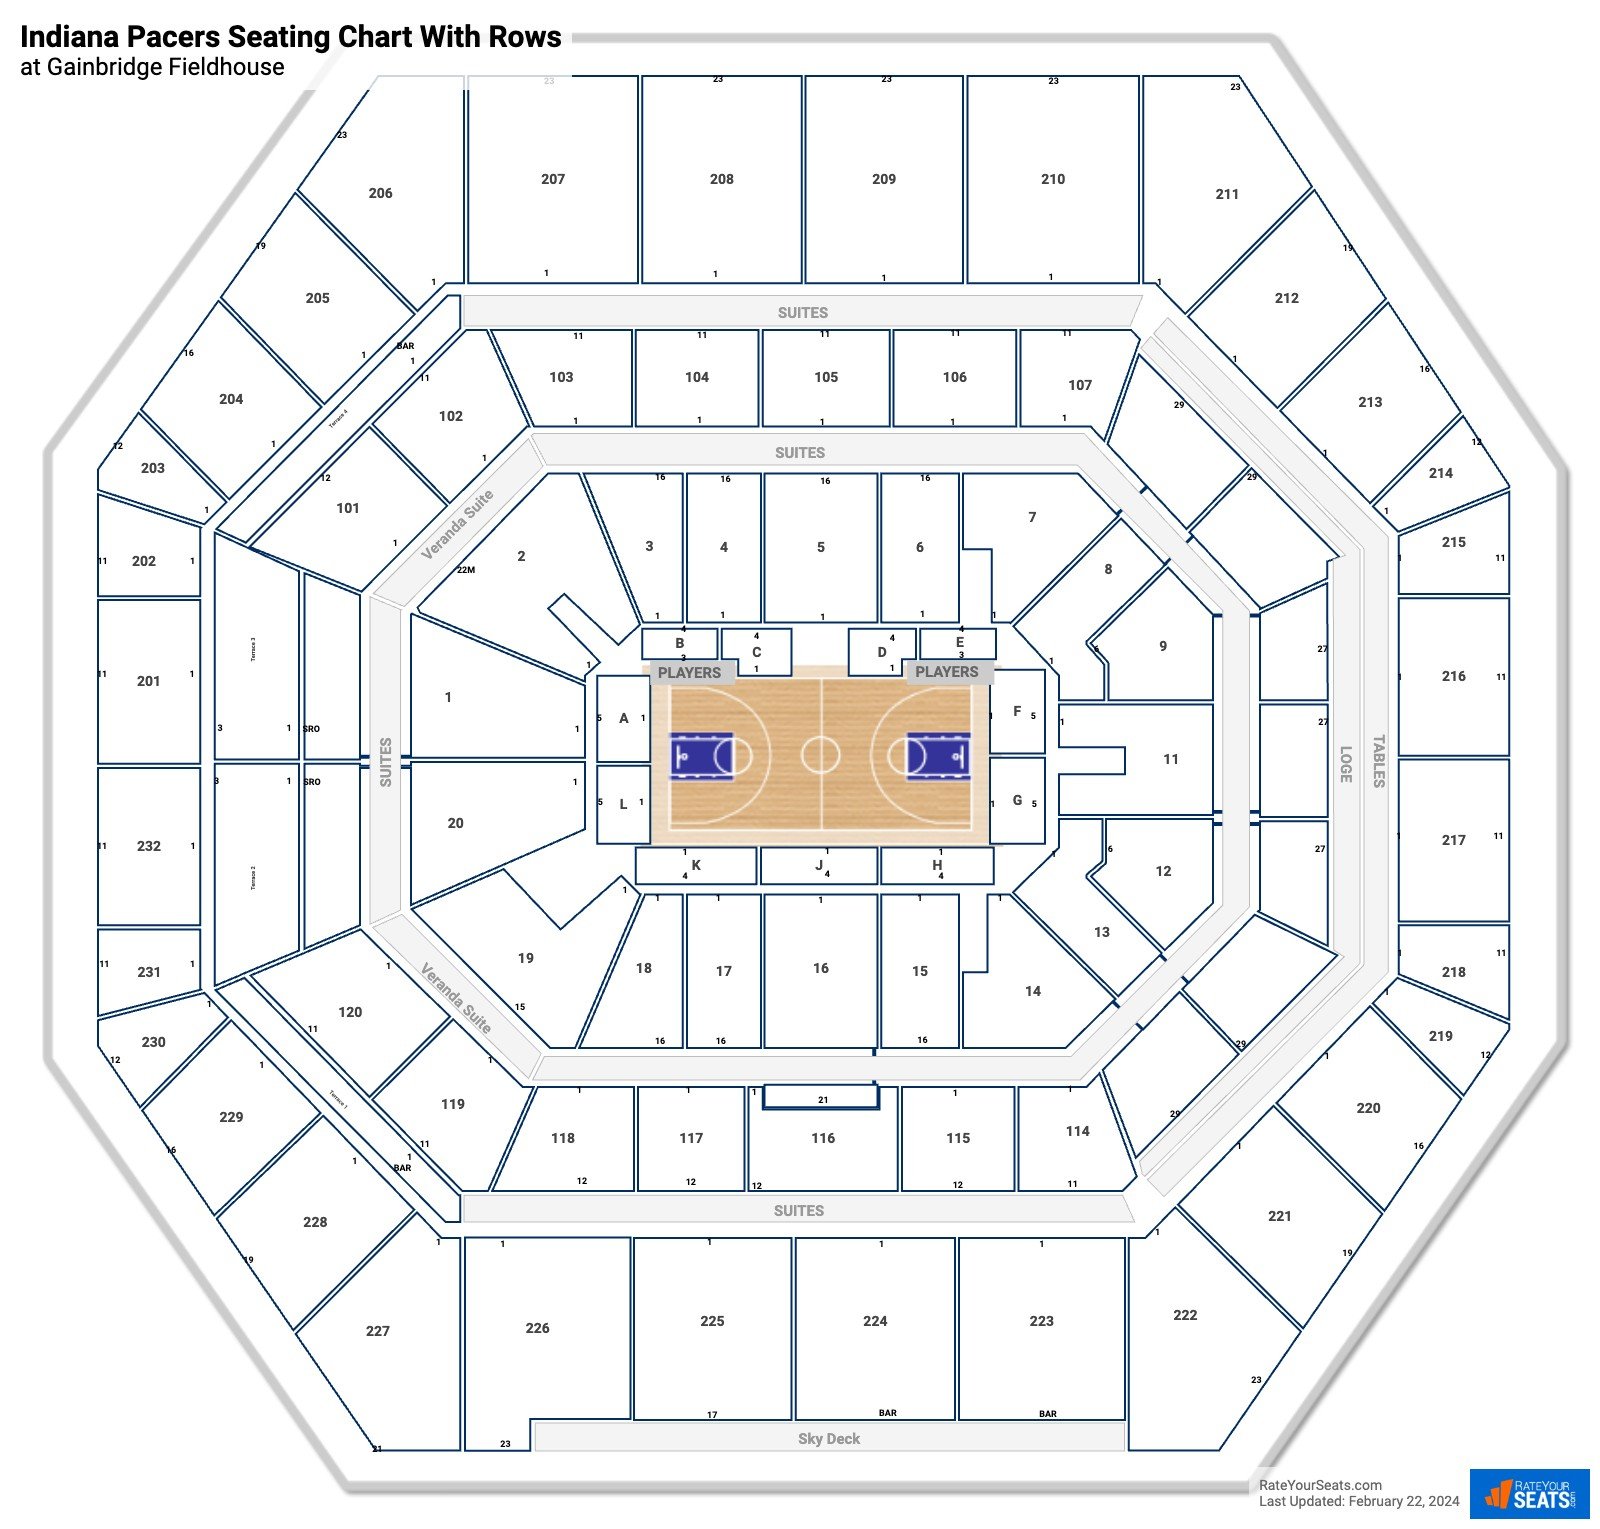 Bankers Life Seating Chart Wwe Two Birds Home